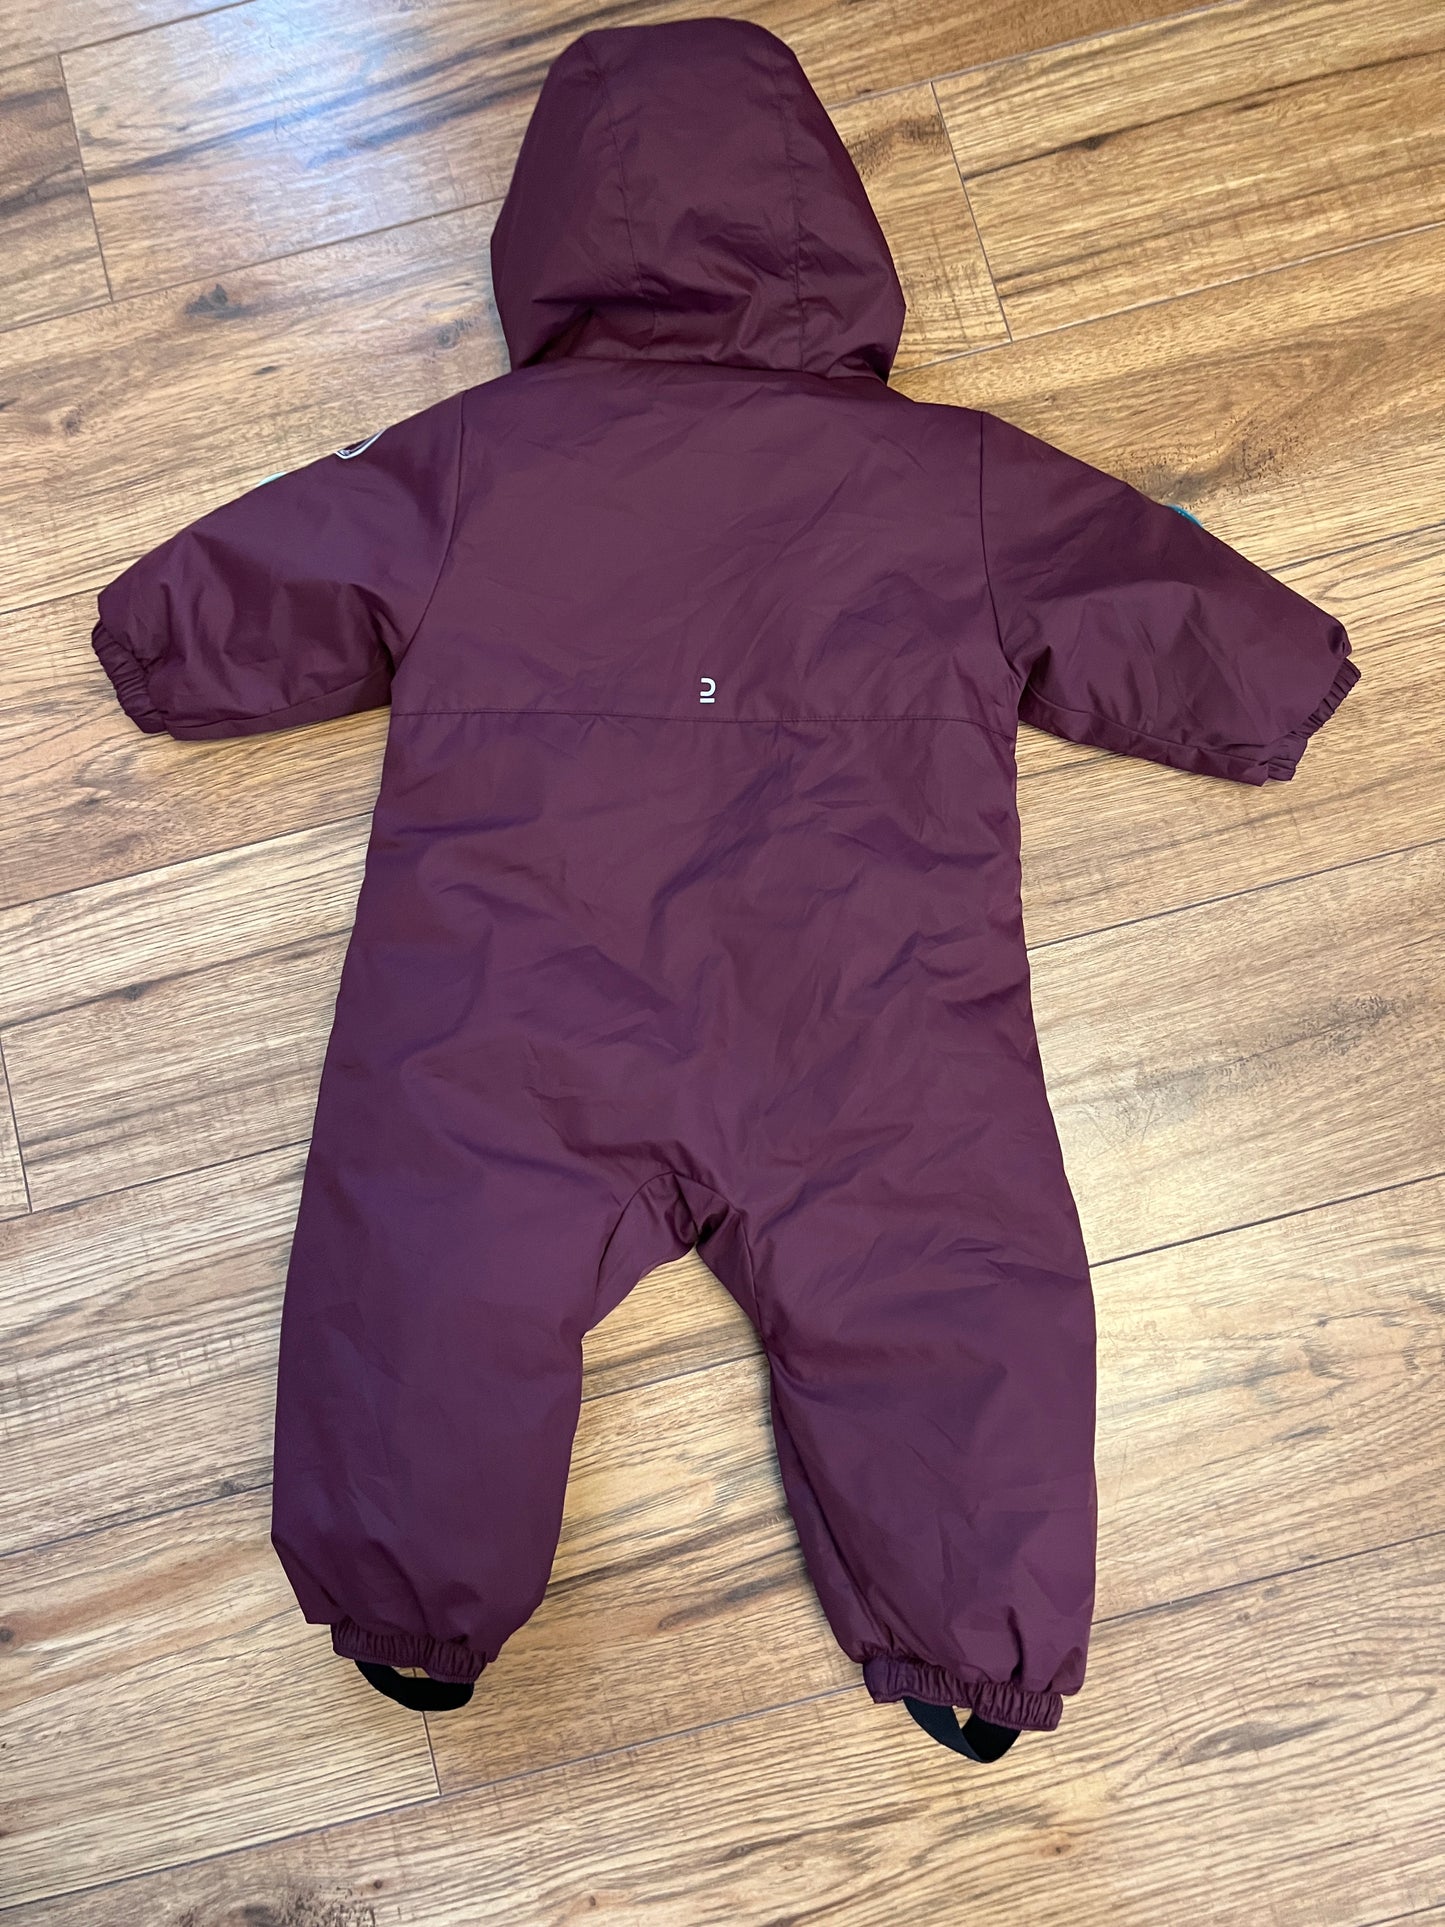 Rain Snow Suit Baby Infant Size 12 Months 1pc Decathlon Lugik Fleece Lined Waterpoof Purple Aqua Blue Designed In The French Alps